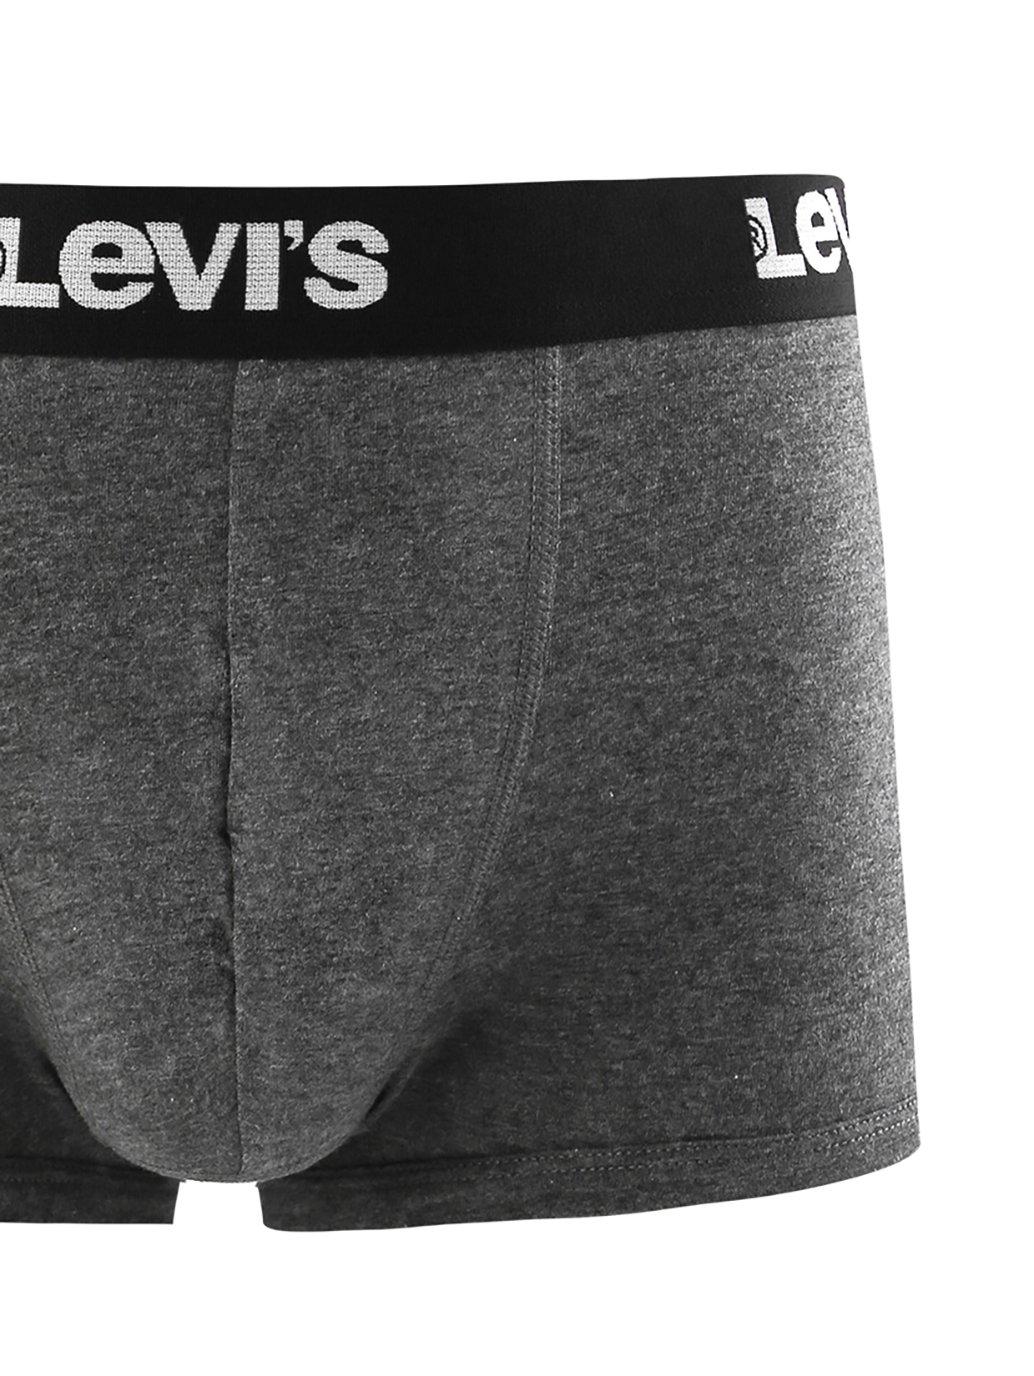 levis malaysia trunks 876190081 13 Details